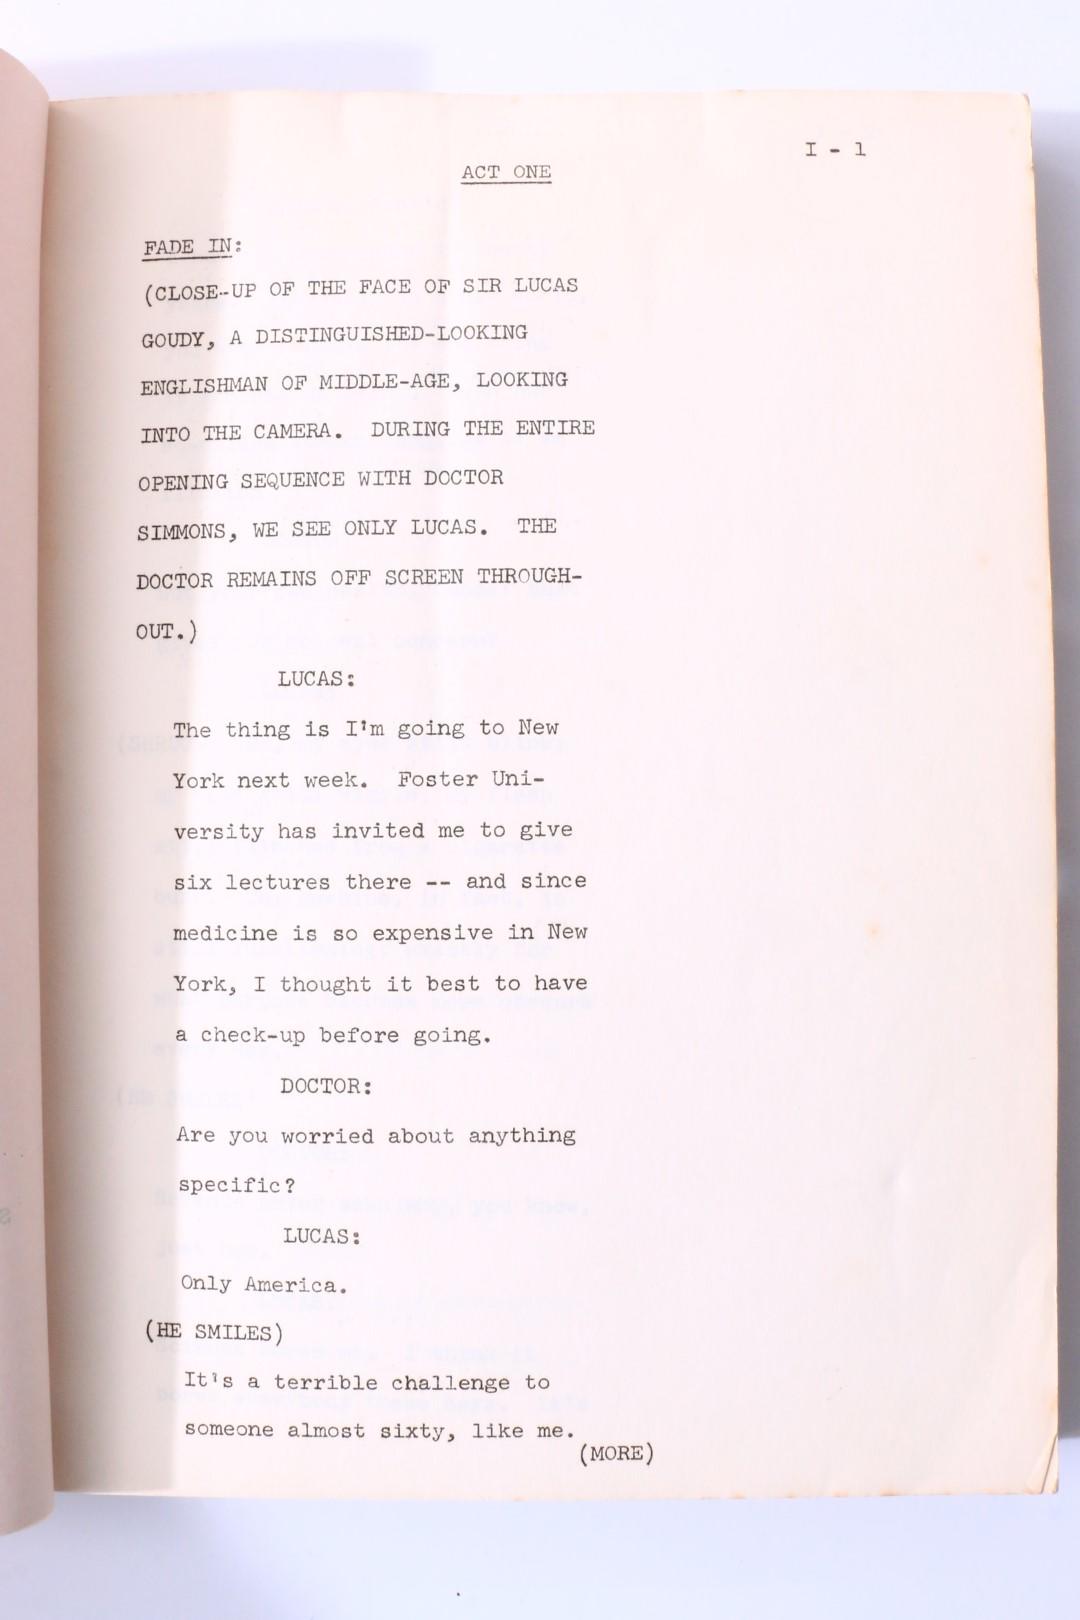 Peter Shaffer - Sir Lucas and the Two Sams: A Play for Television - None, n.d. [1967], Manuscript.